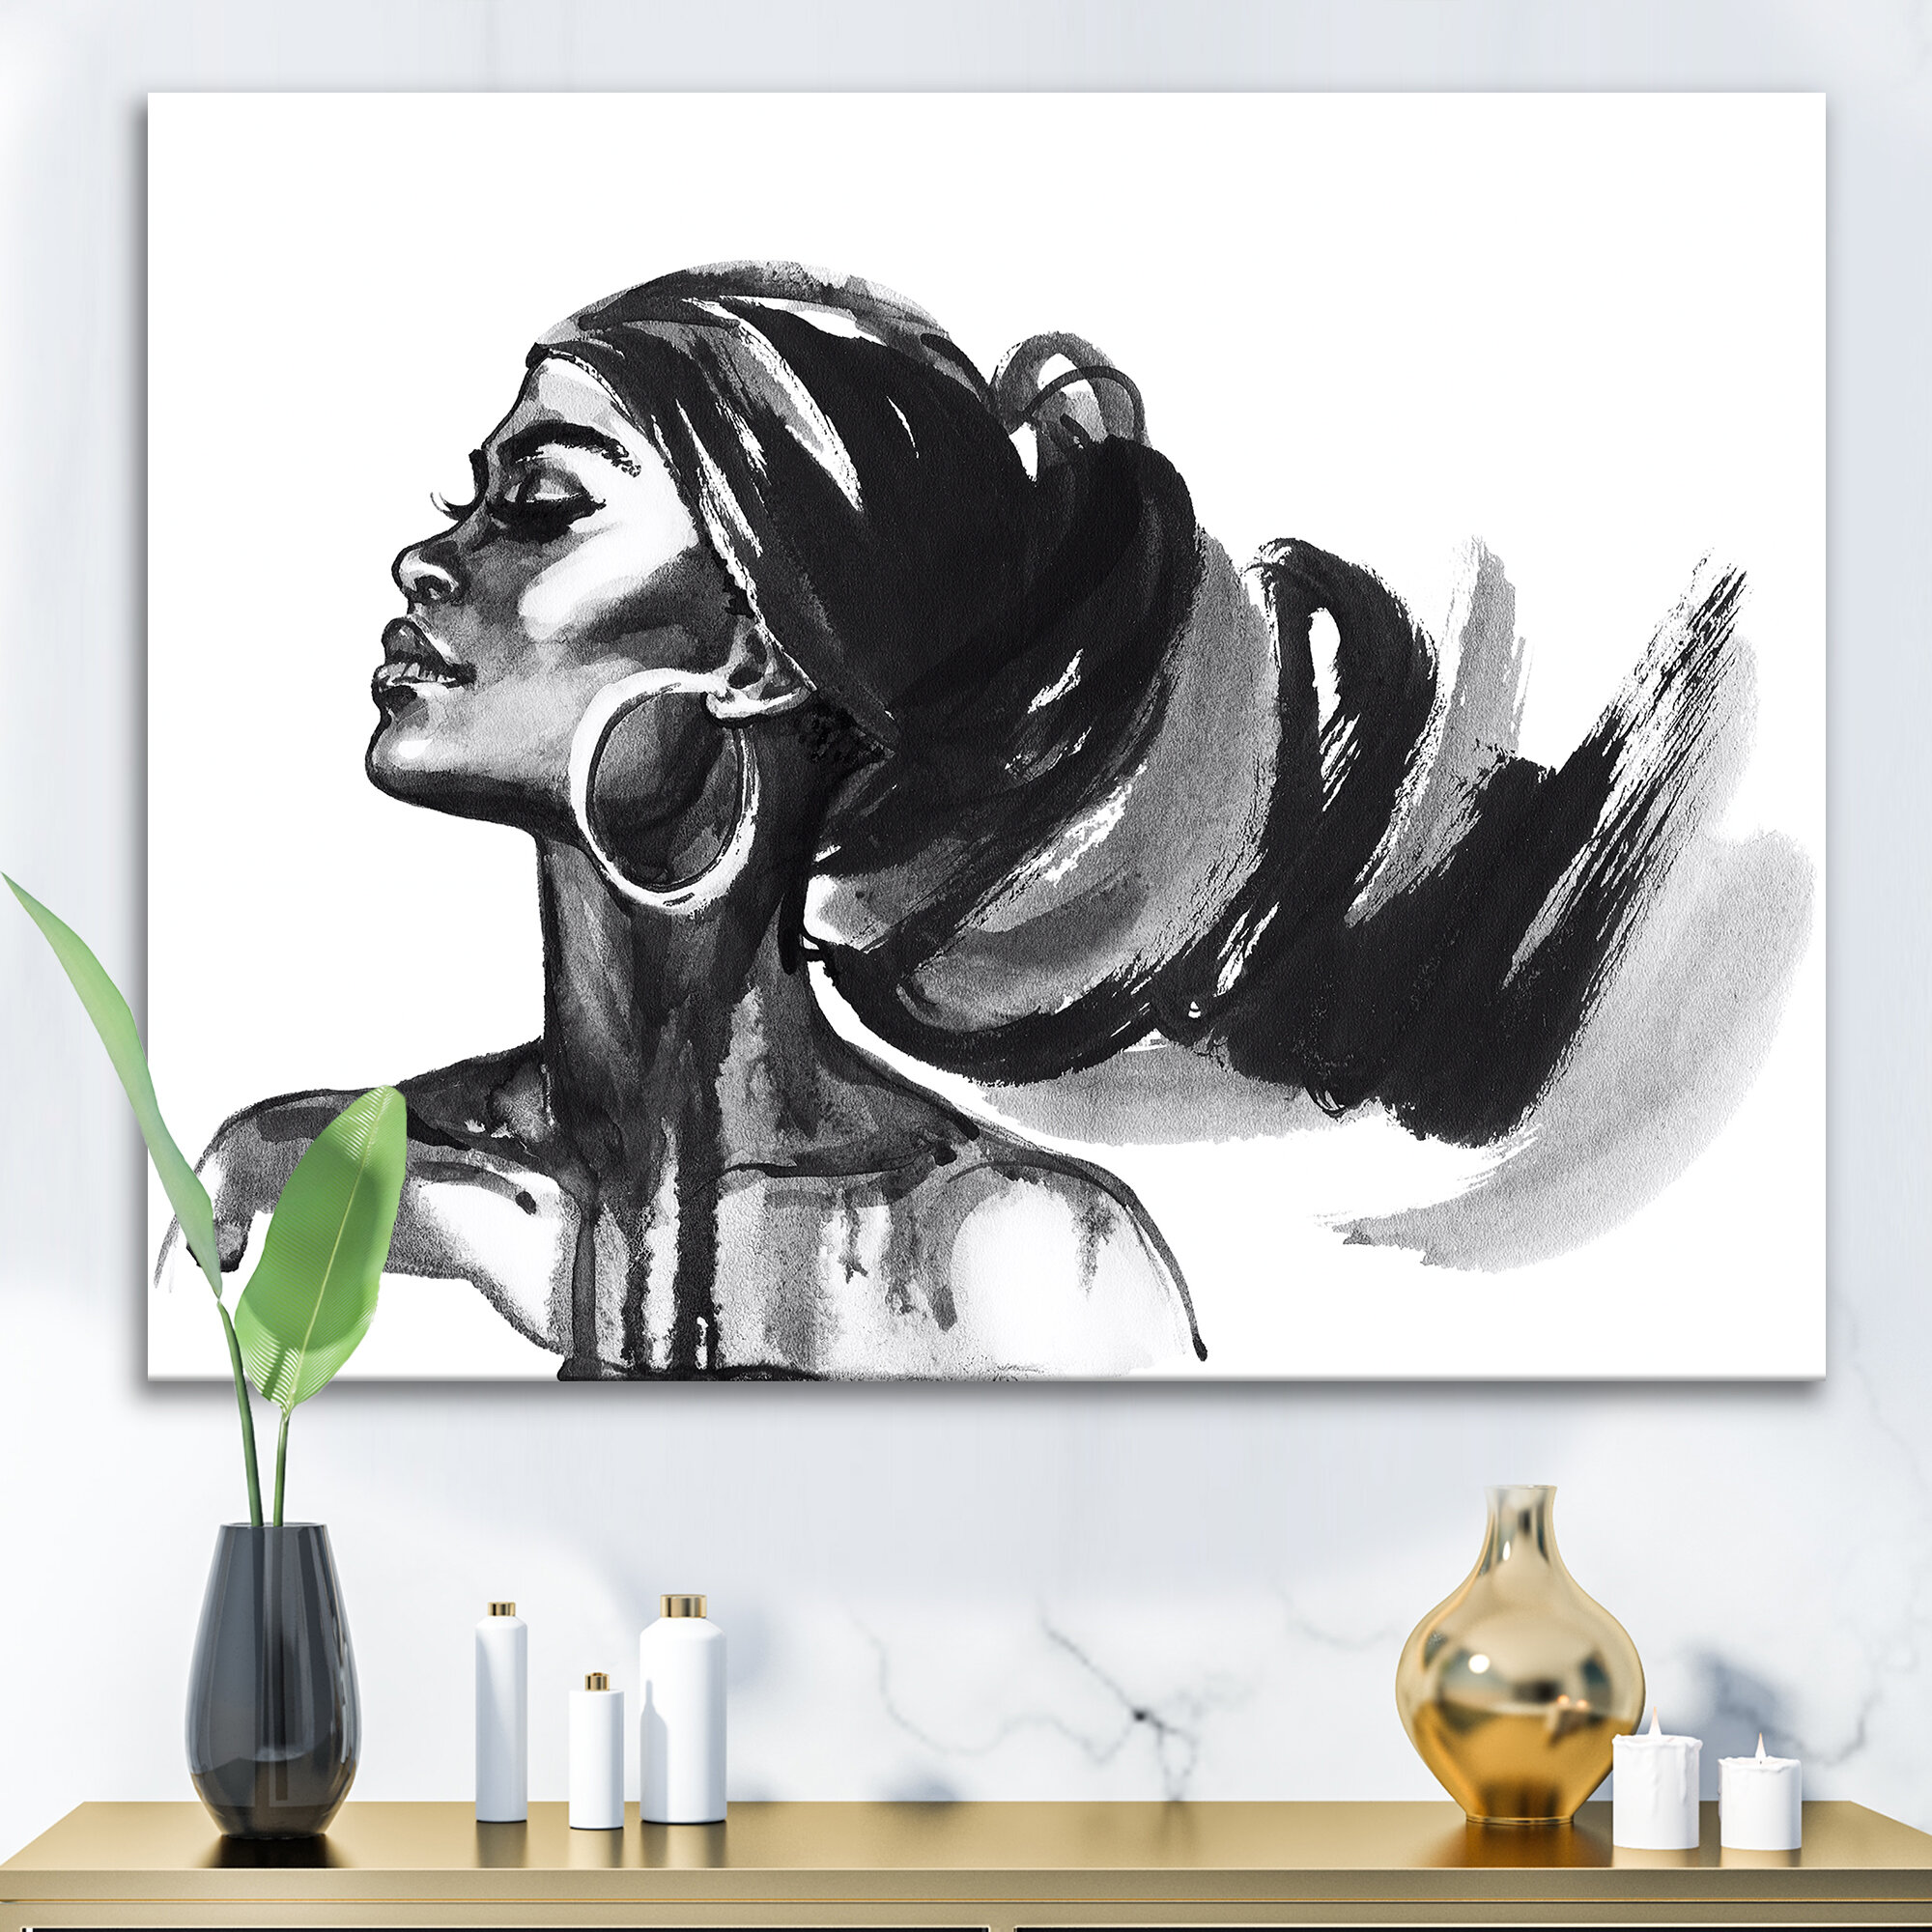 African Woman Wall Art, Black Woman Wall Decor Canvas Print, African American Print Painting, African Artwork Framed Easy to Hang - 1